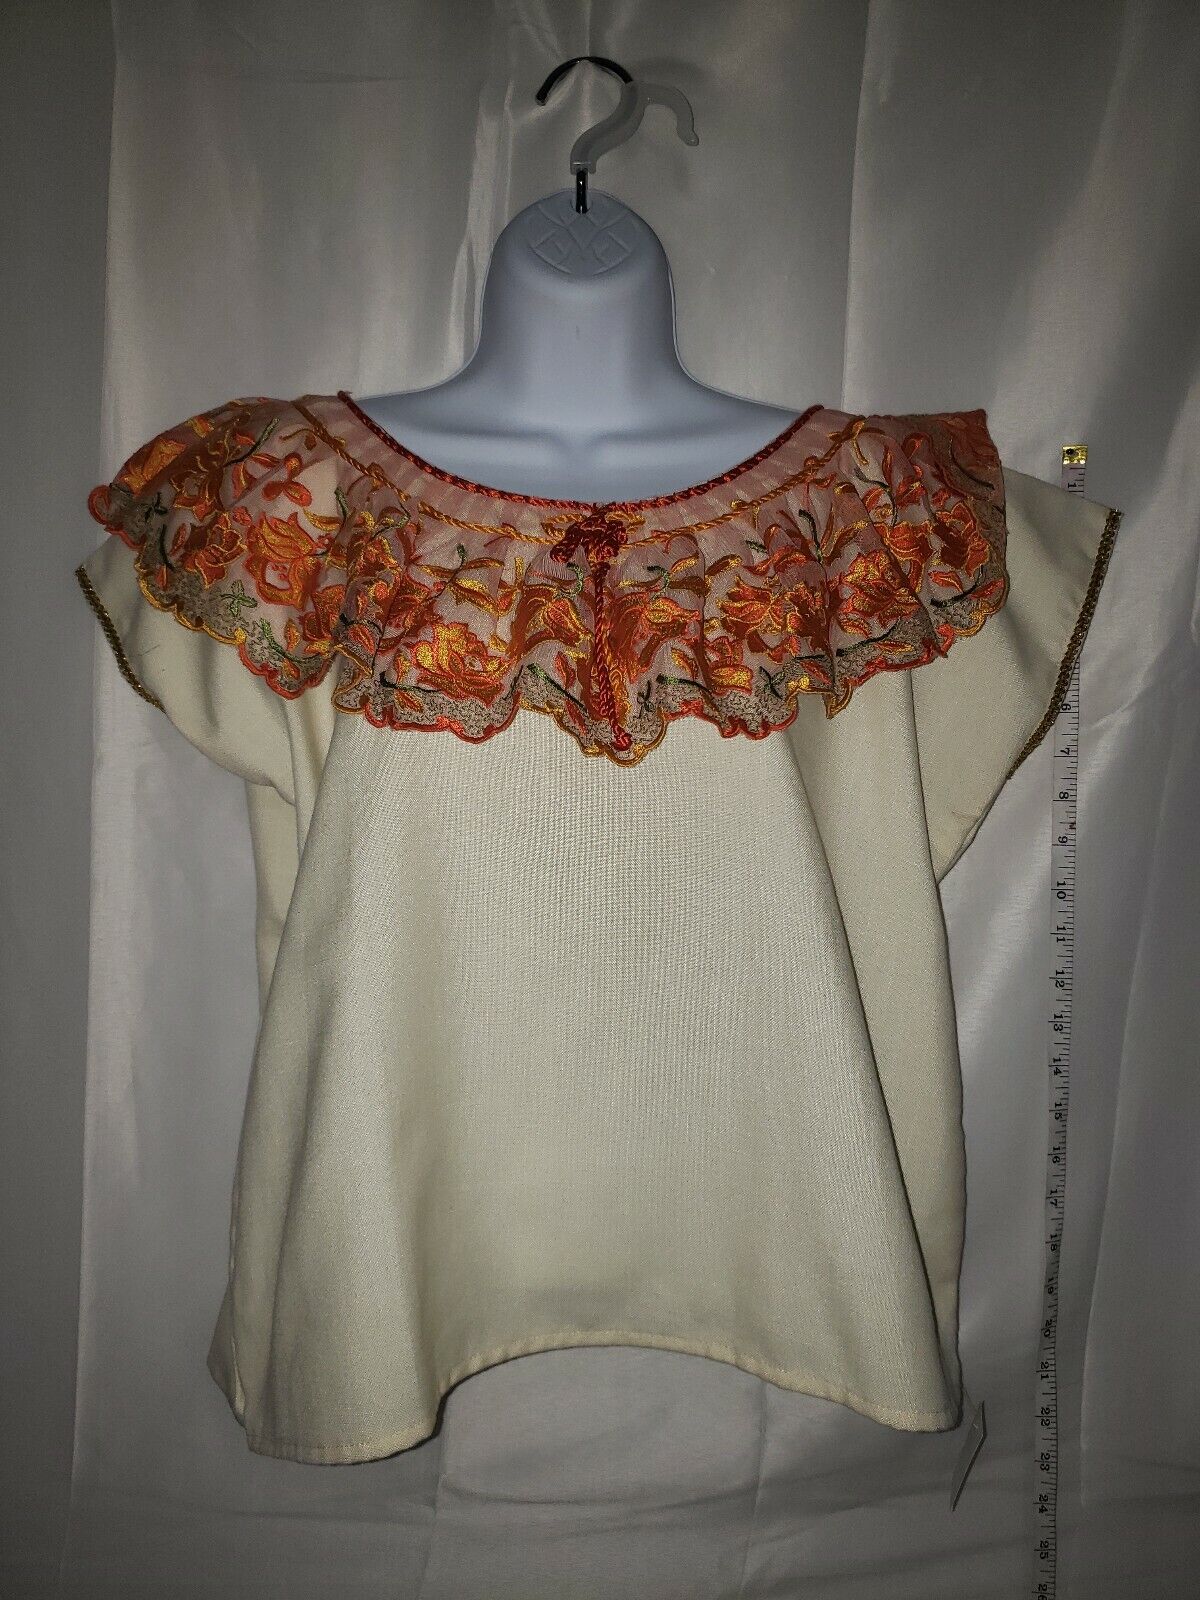 Huipil Tipico De Max 81% OFF Guatemala. Hupil Vintage Blouse Guatemala Branded goods From